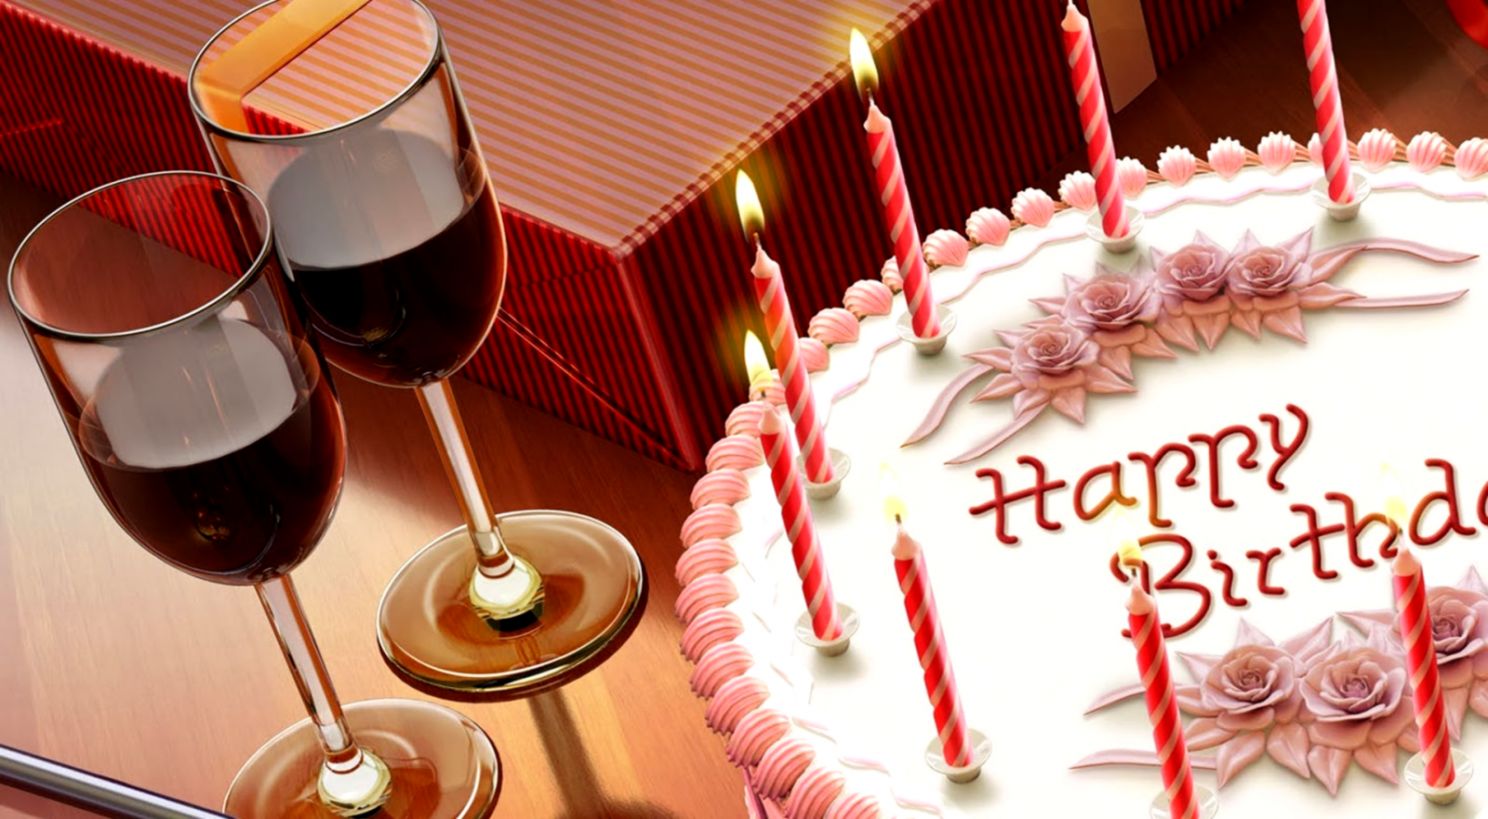 Happy Birthday Image Hd Download - Happy Birthday , HD Wallpaper & Backgrounds